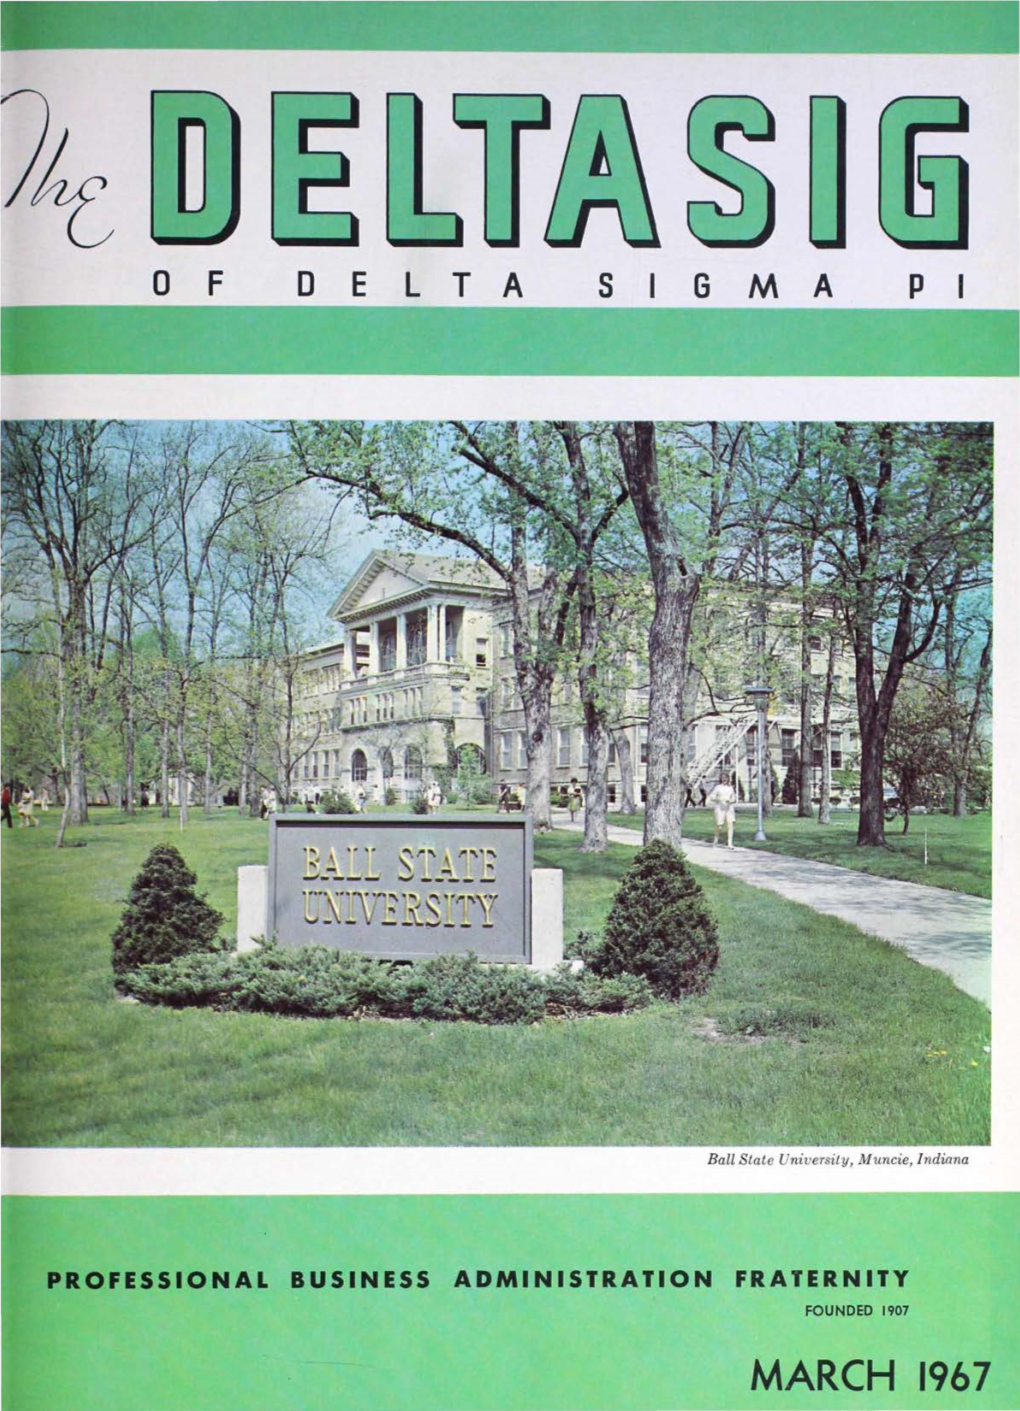 MARCH 1967 the International Fraternity of Delta Sigma Pi